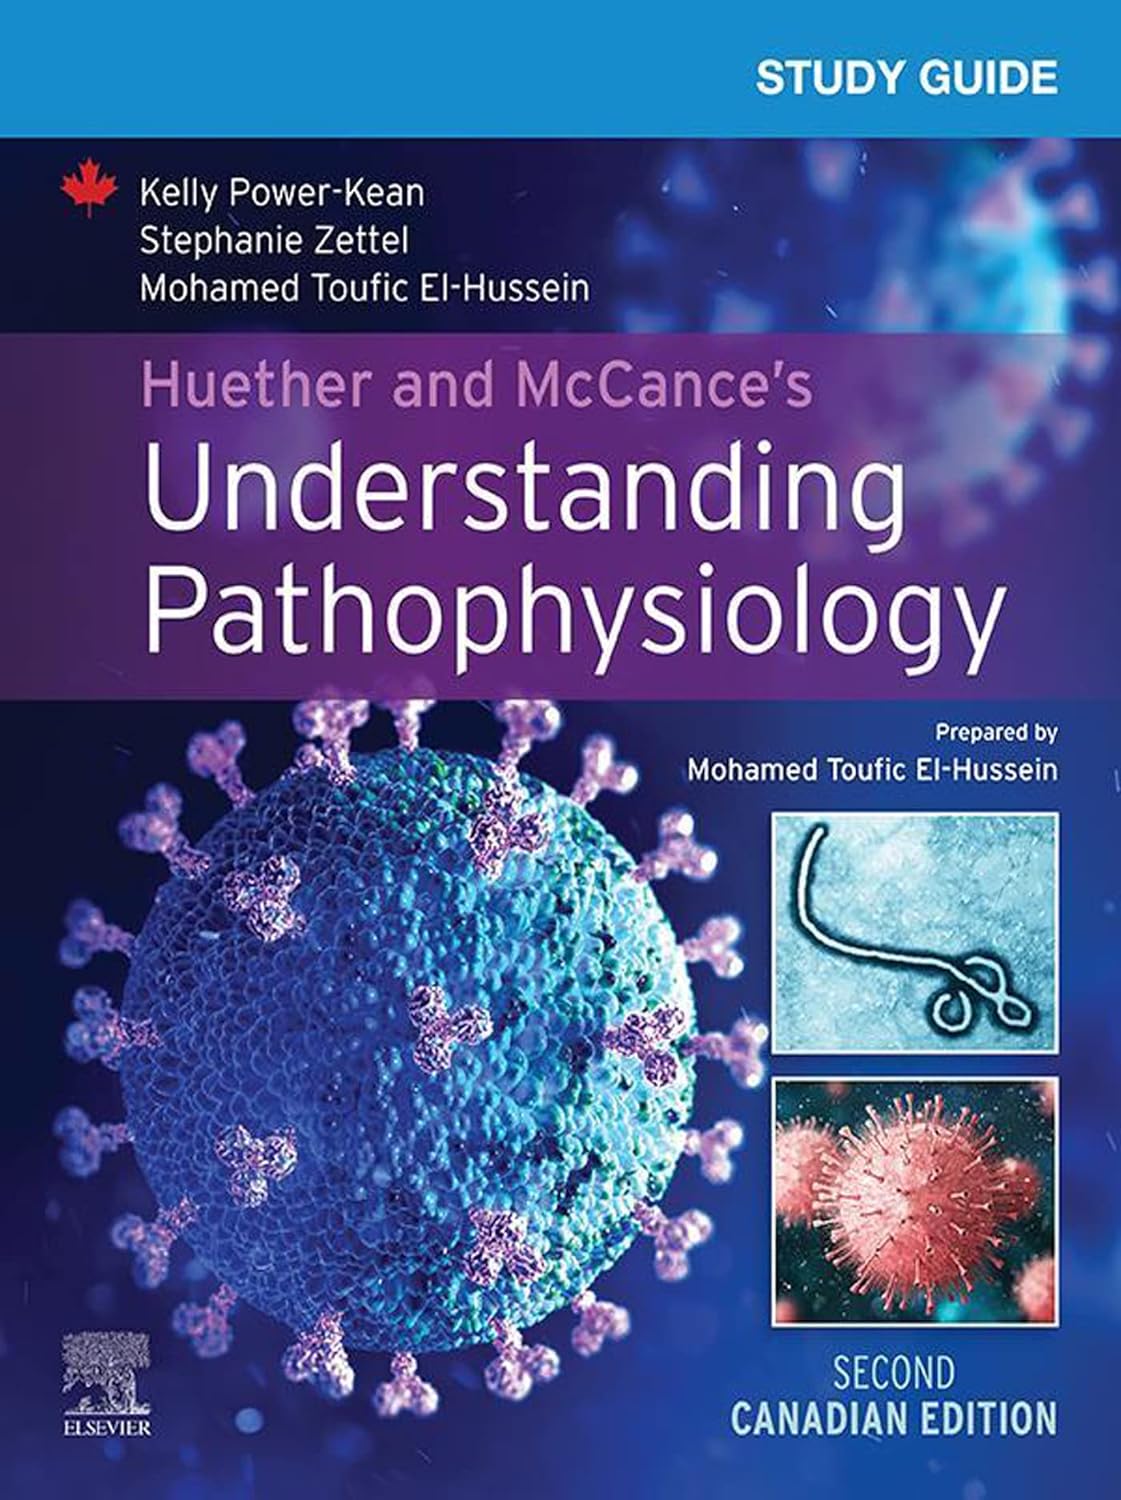 Study Guide for Huether and McCance s Understanding Pathophysiology, 2nd Canadian Edition by  Kelly Power-Kean 